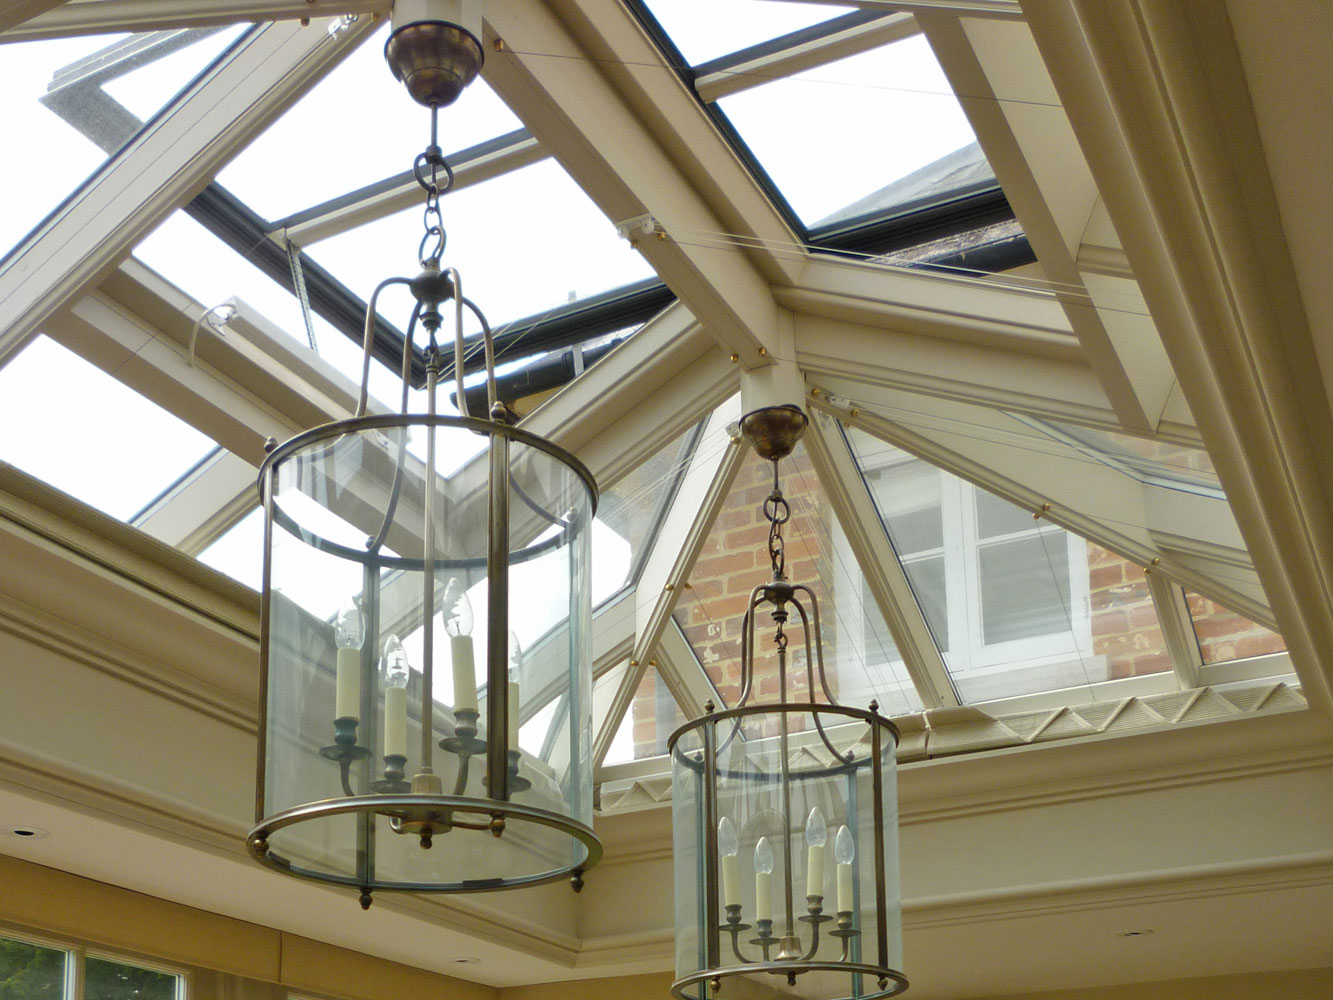 Example of pendant lighting hung from a roof lantern